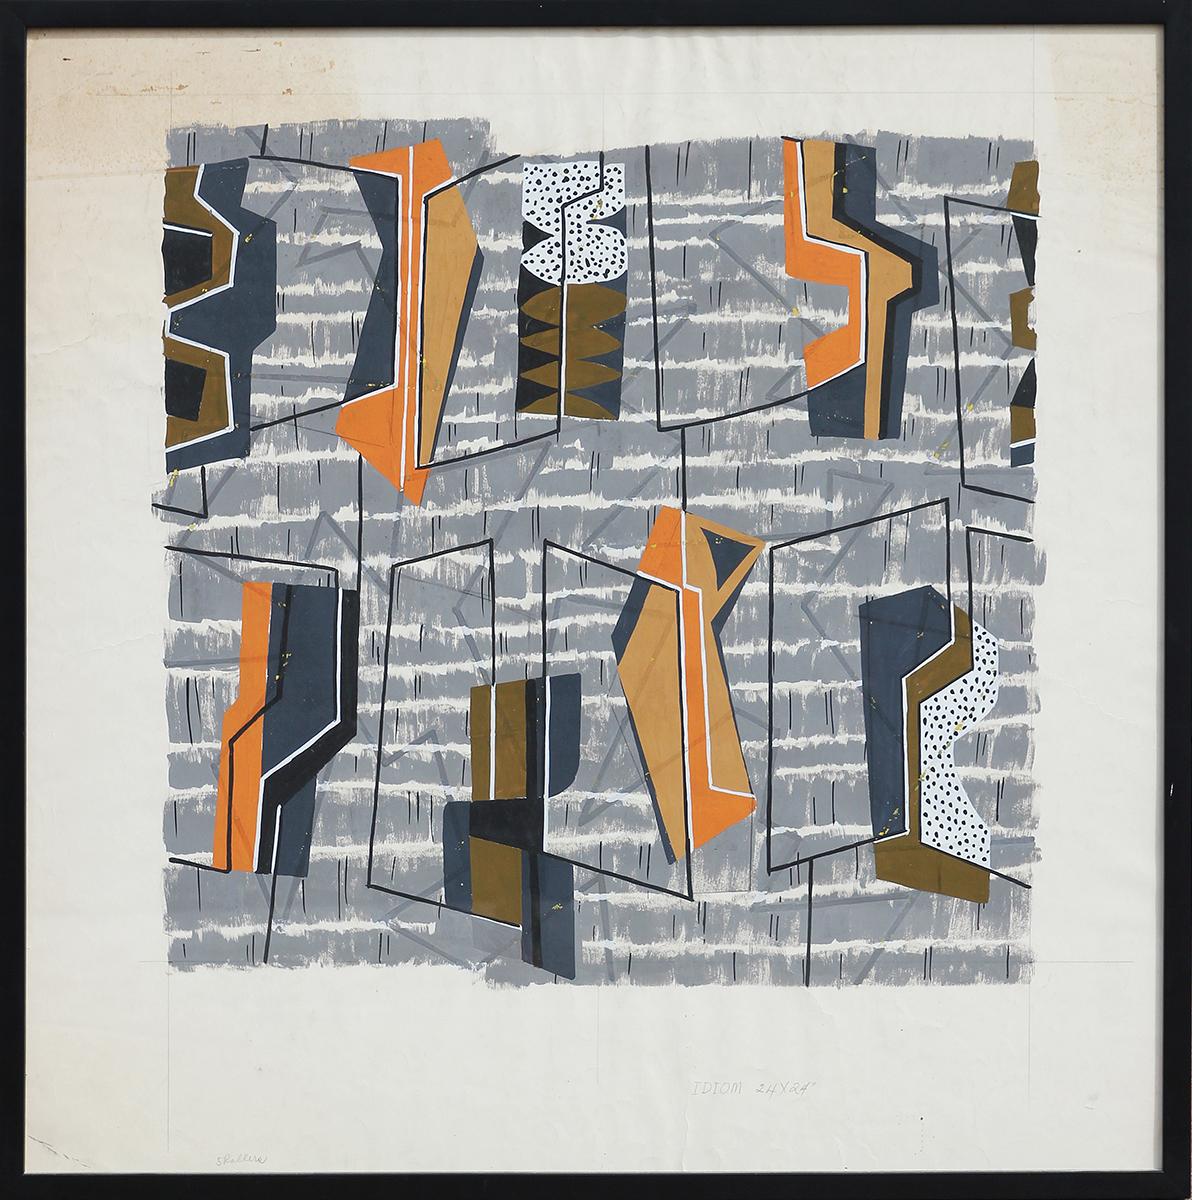 John Little Abstract Drawing - "Idioms" Modern Orange, Brown, Gray, and Black Geometric Abstract Painting